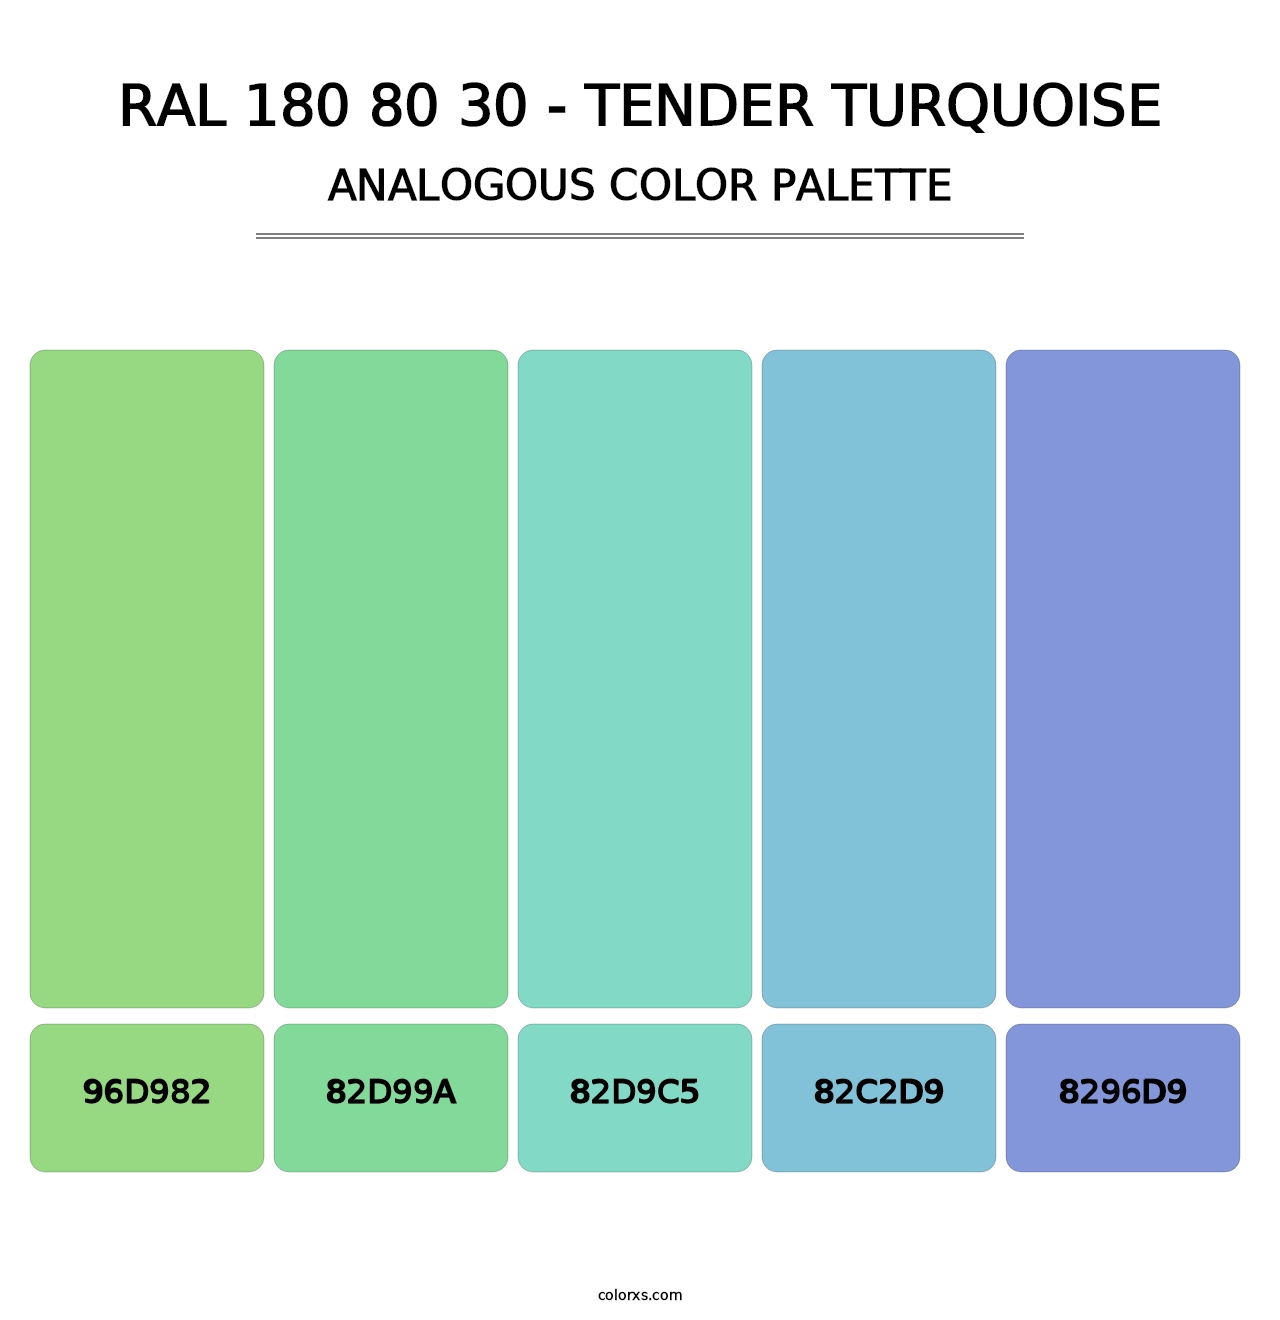 RAL 180 80 30 - Tender Turquoise - Analogous Color Palette